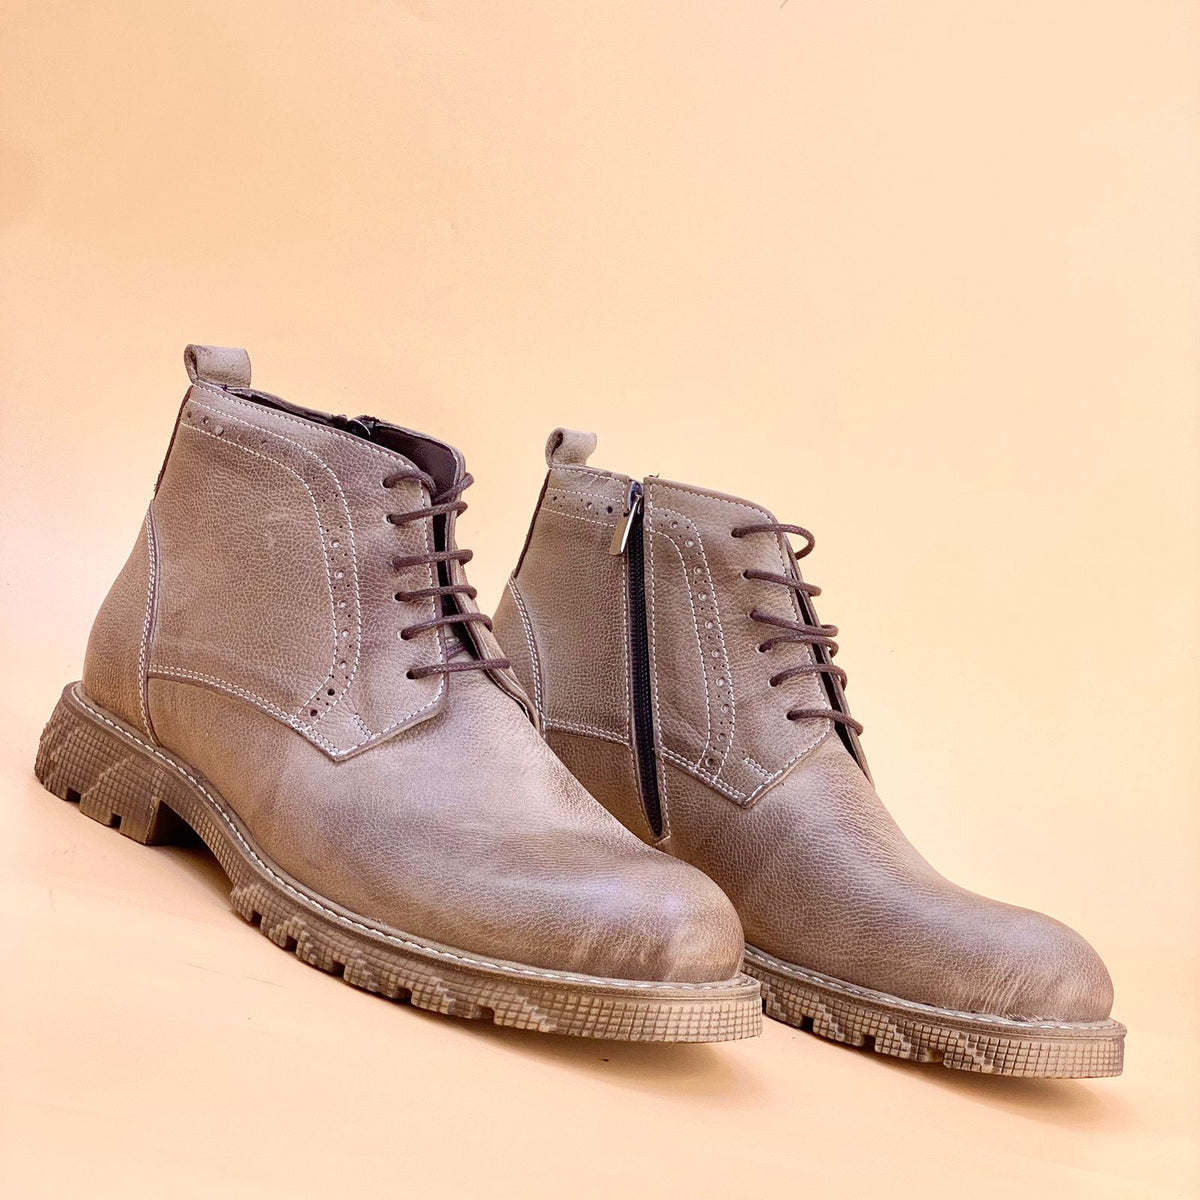 MADE IN TURKEY GENUINE LEATHER MEN BOOTS ON503